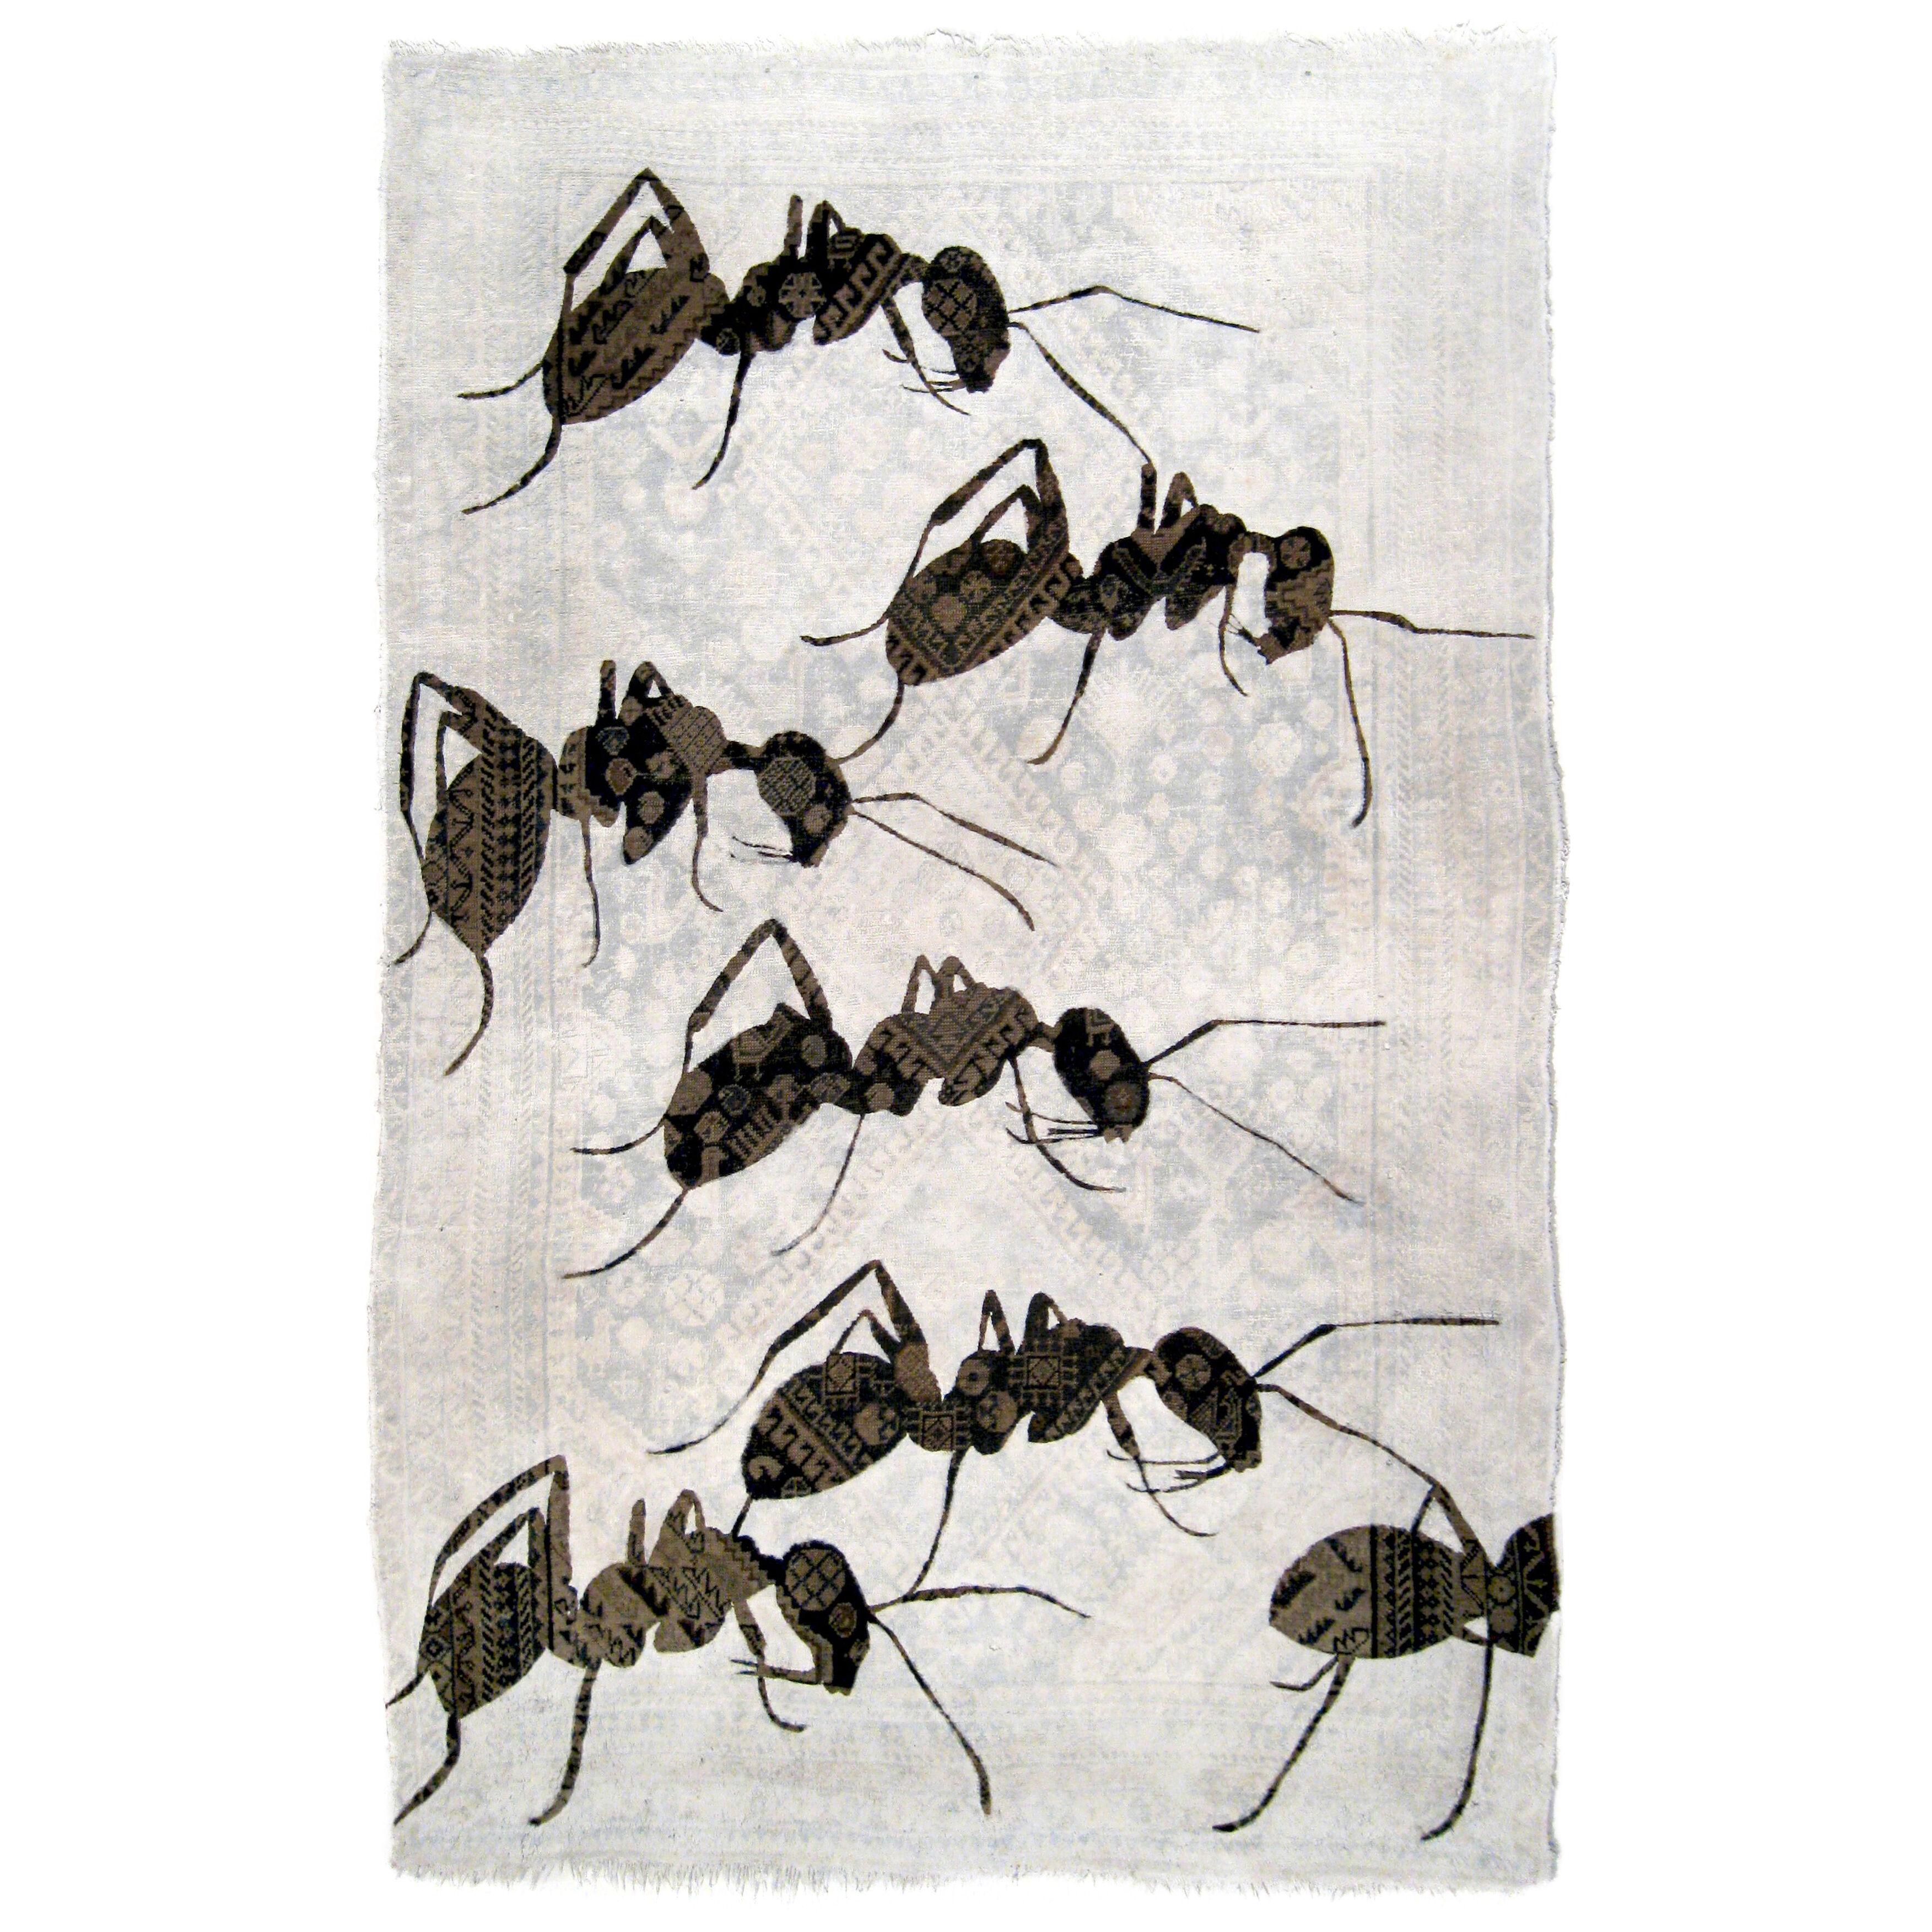 ANTS - wall hanging / tapestry